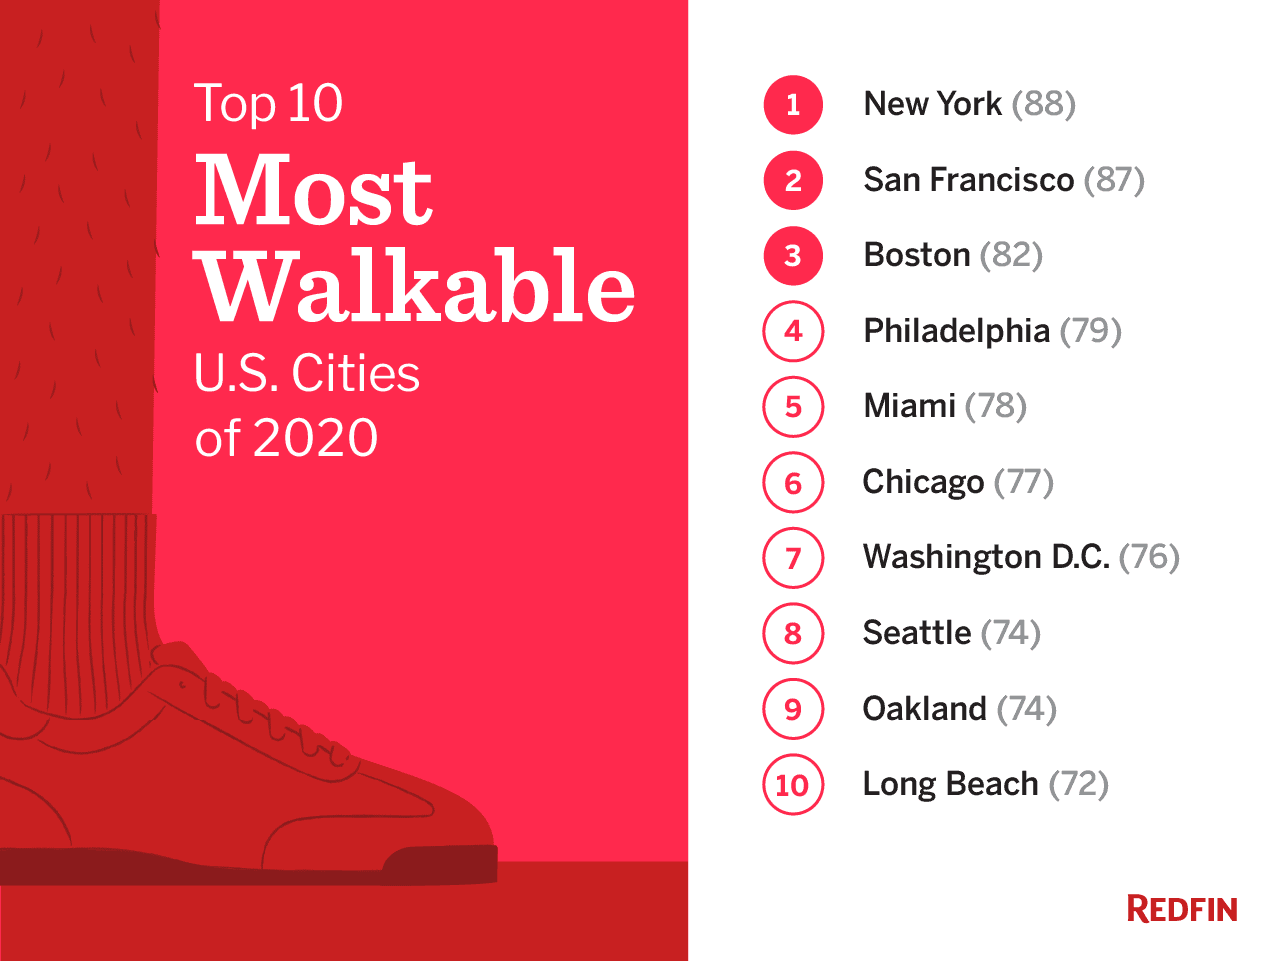 List of most walkable cities in the U.S.